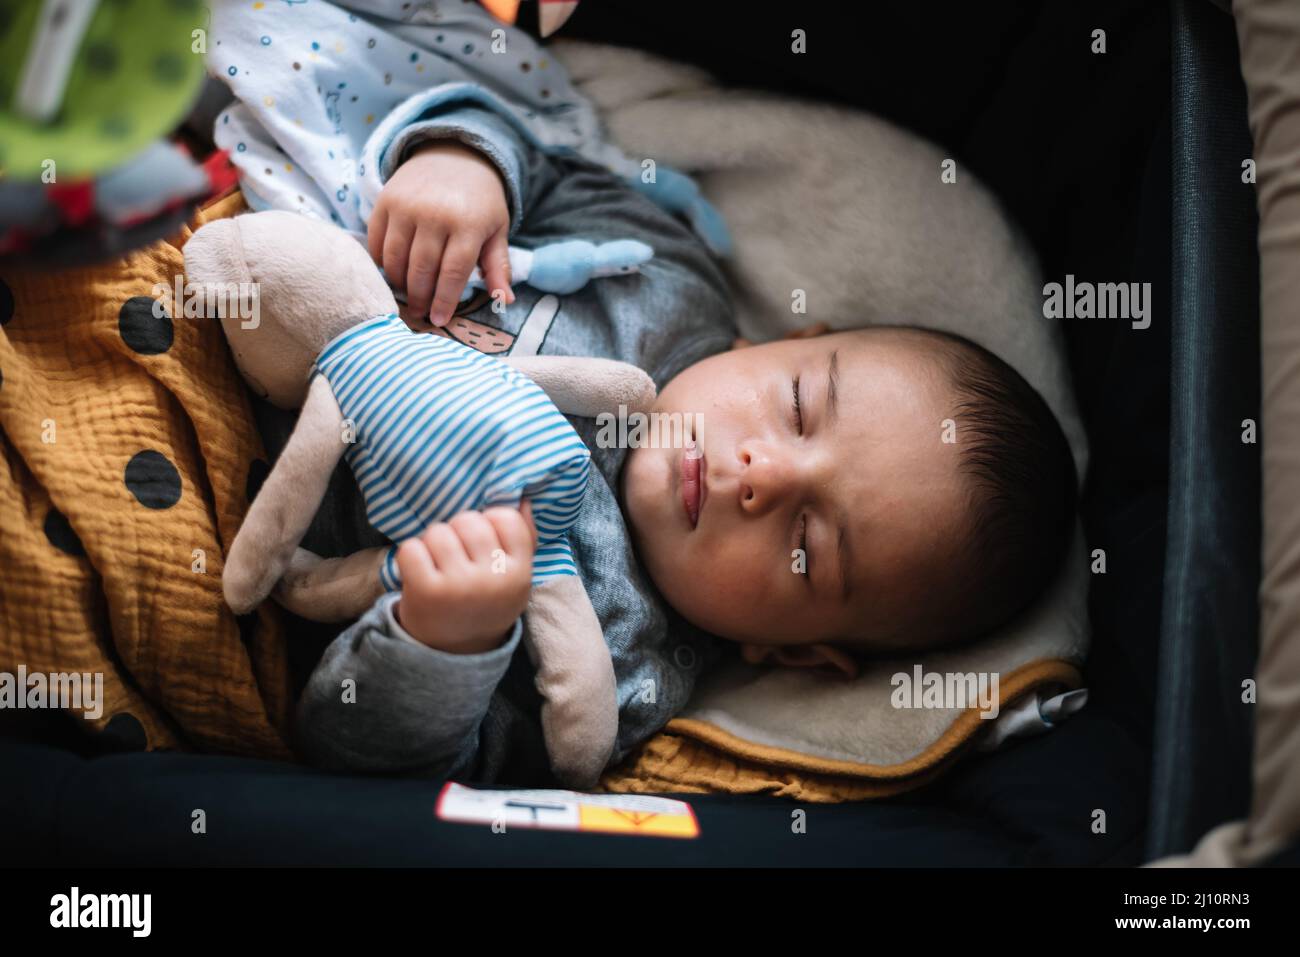 Baby sleeping in the stroller next to his teddy bear Stock Photo